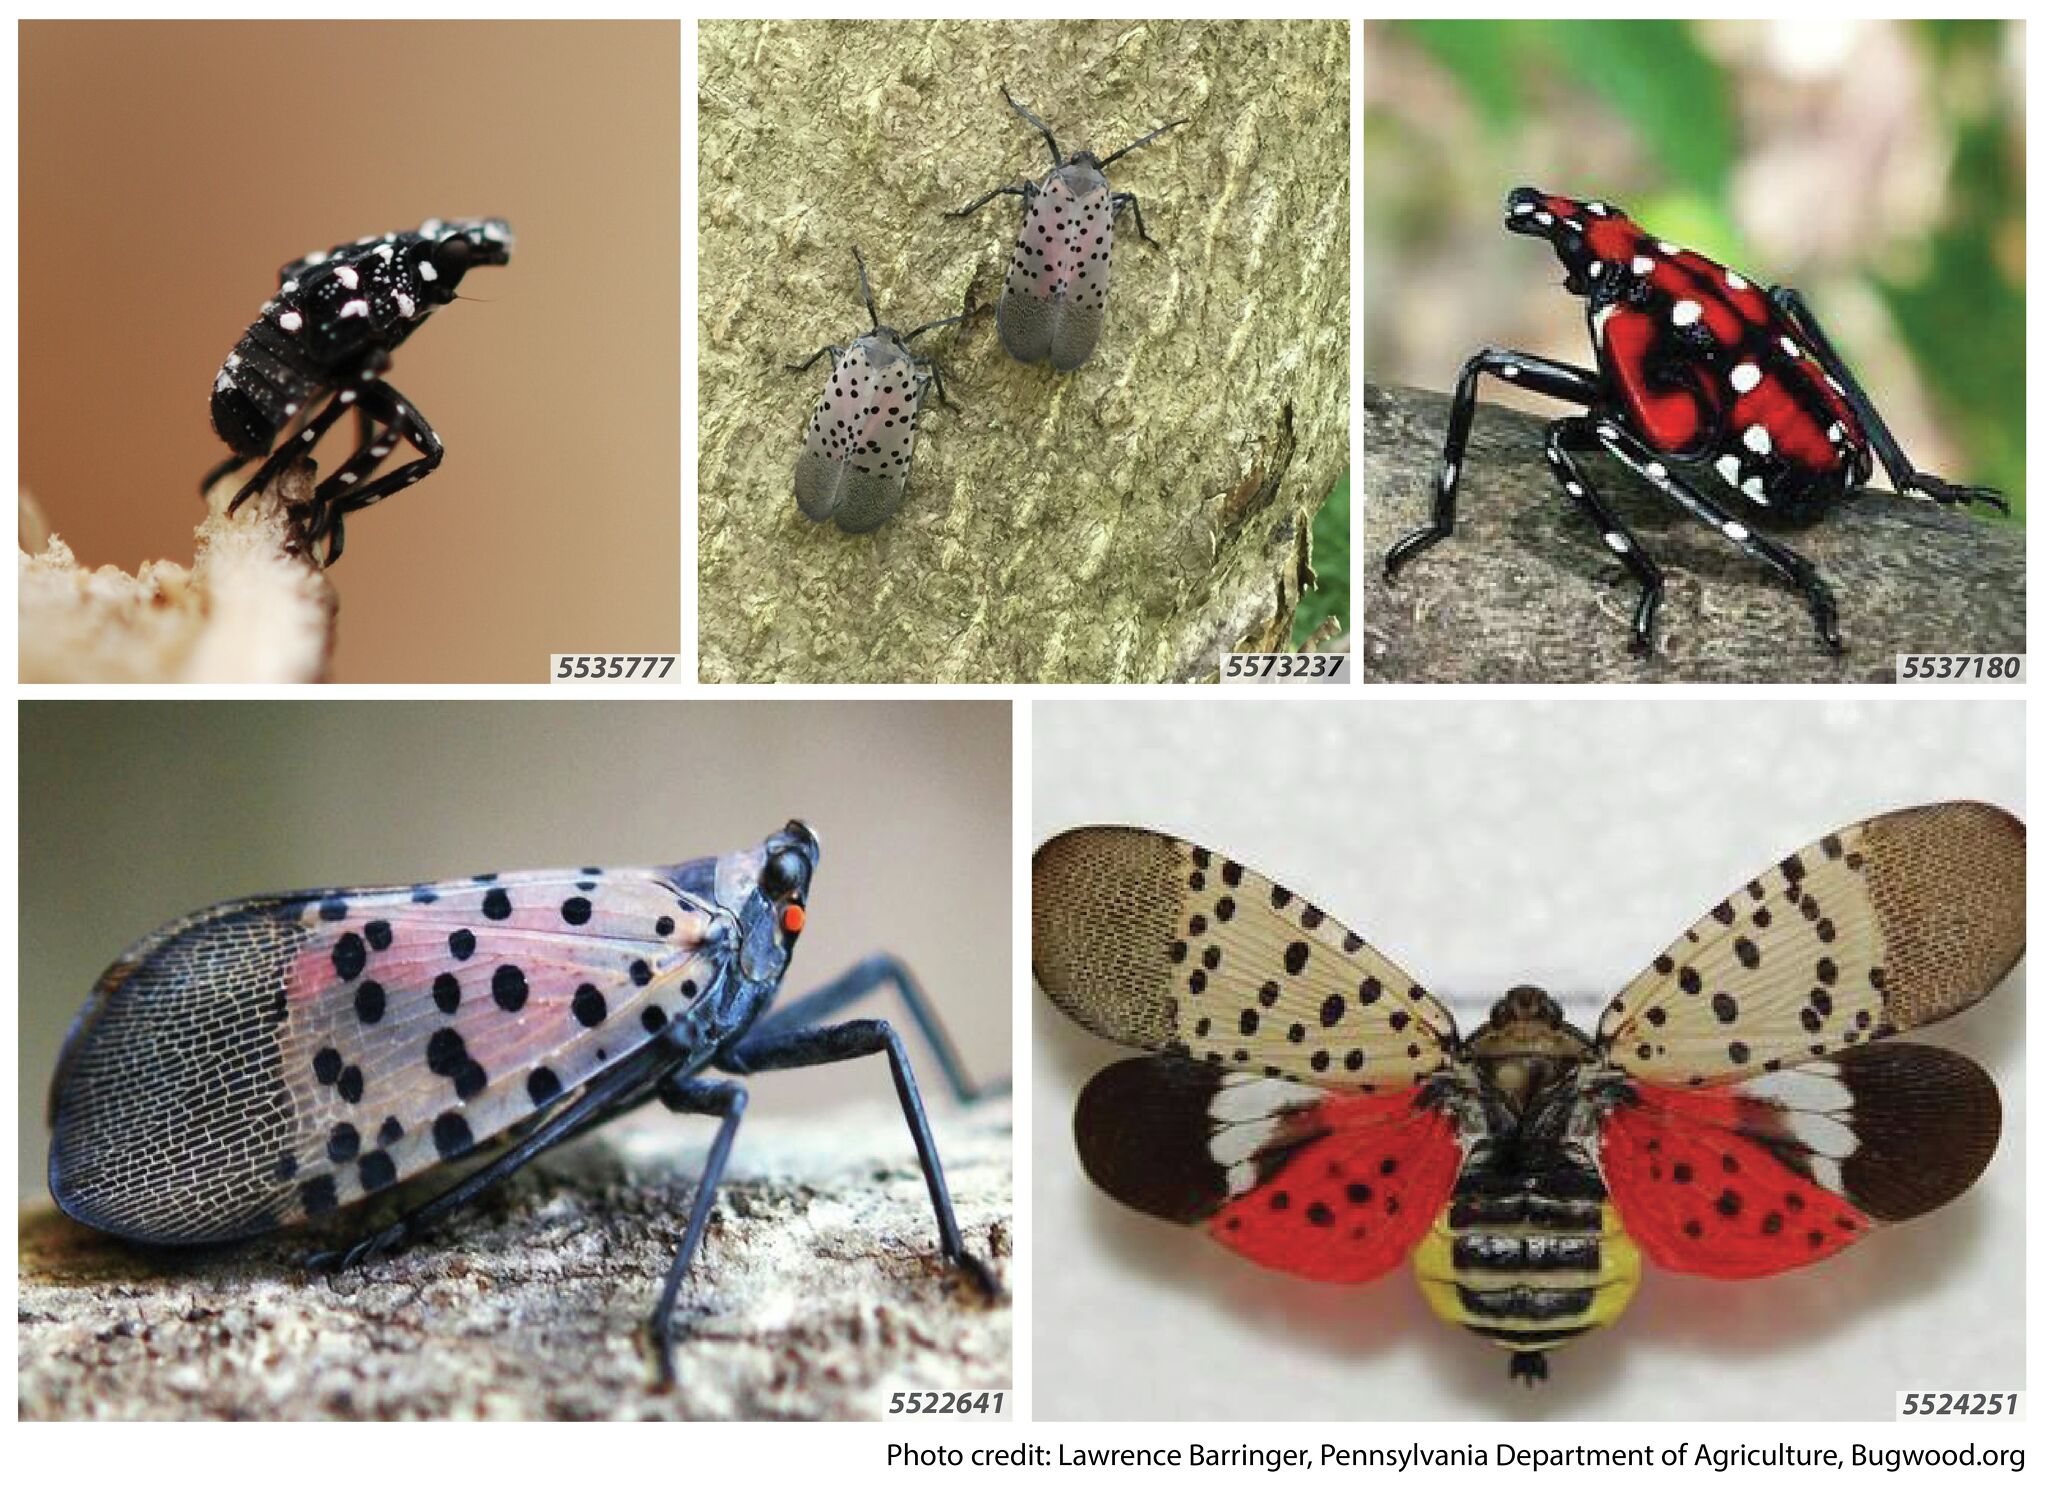 Michigan’s fruit crop threatened by spread of spotted lanternfly